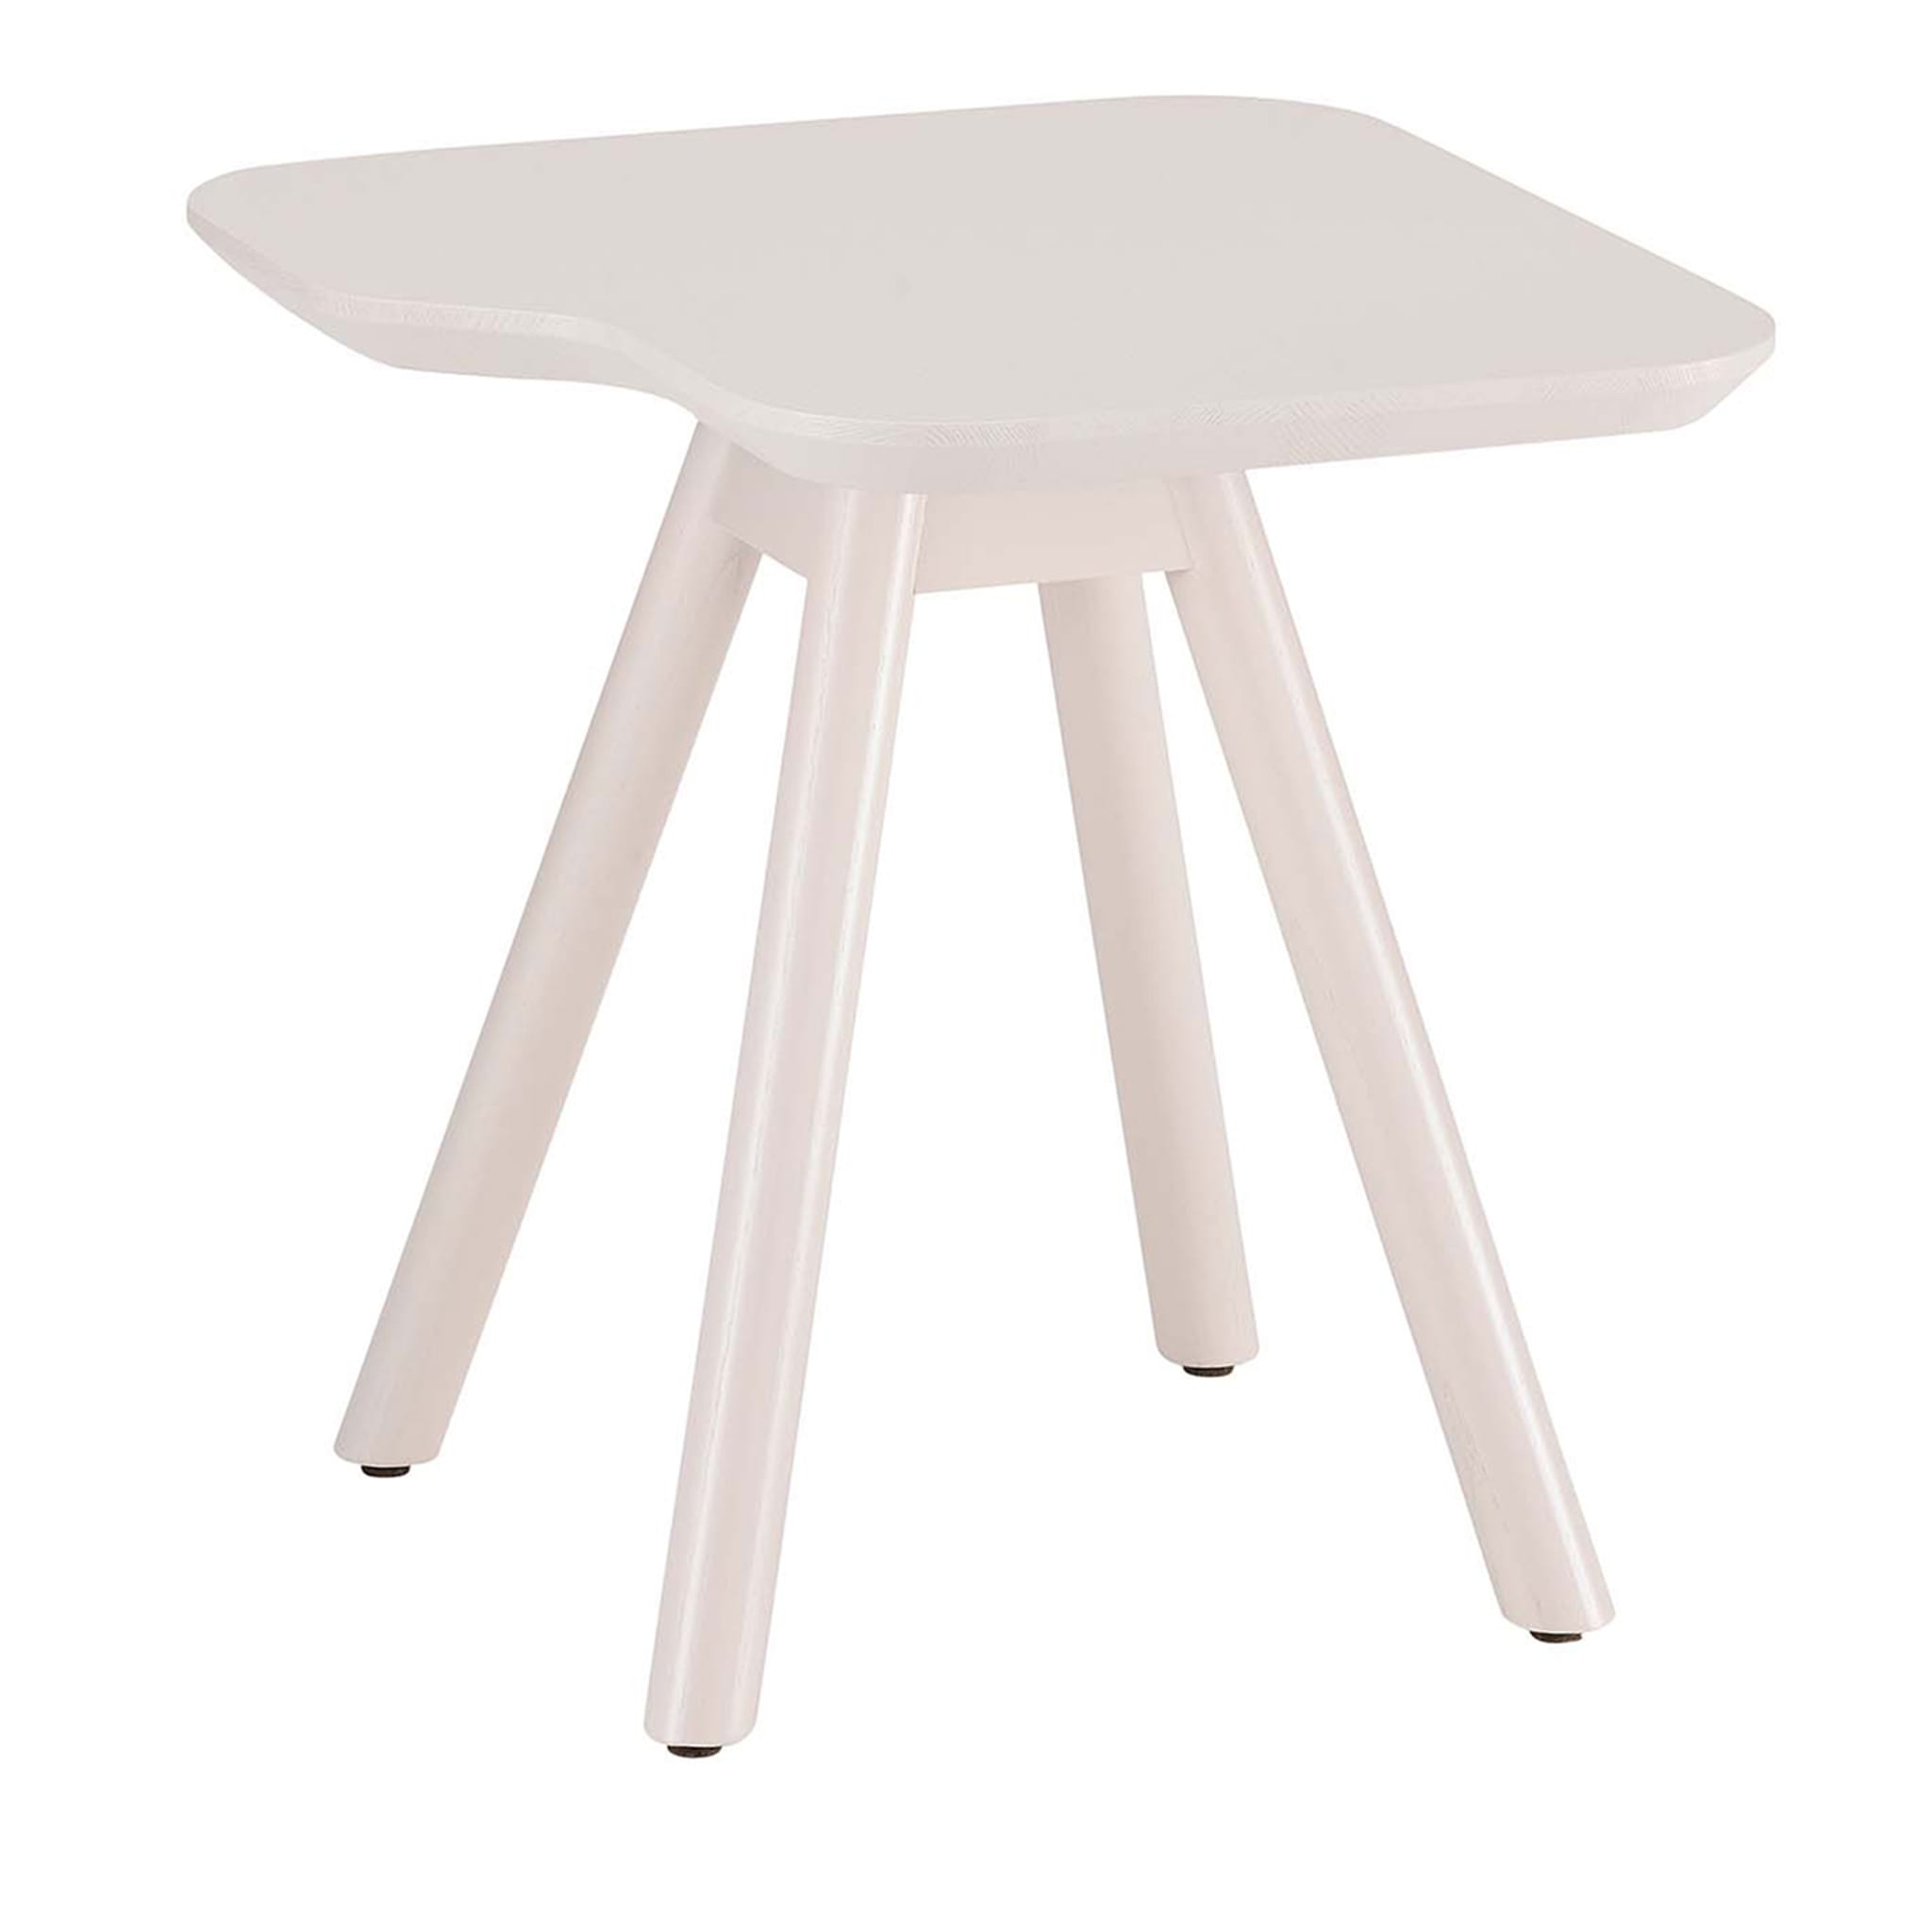 Aky Small White Side Table by Emilio Nanni - Main view